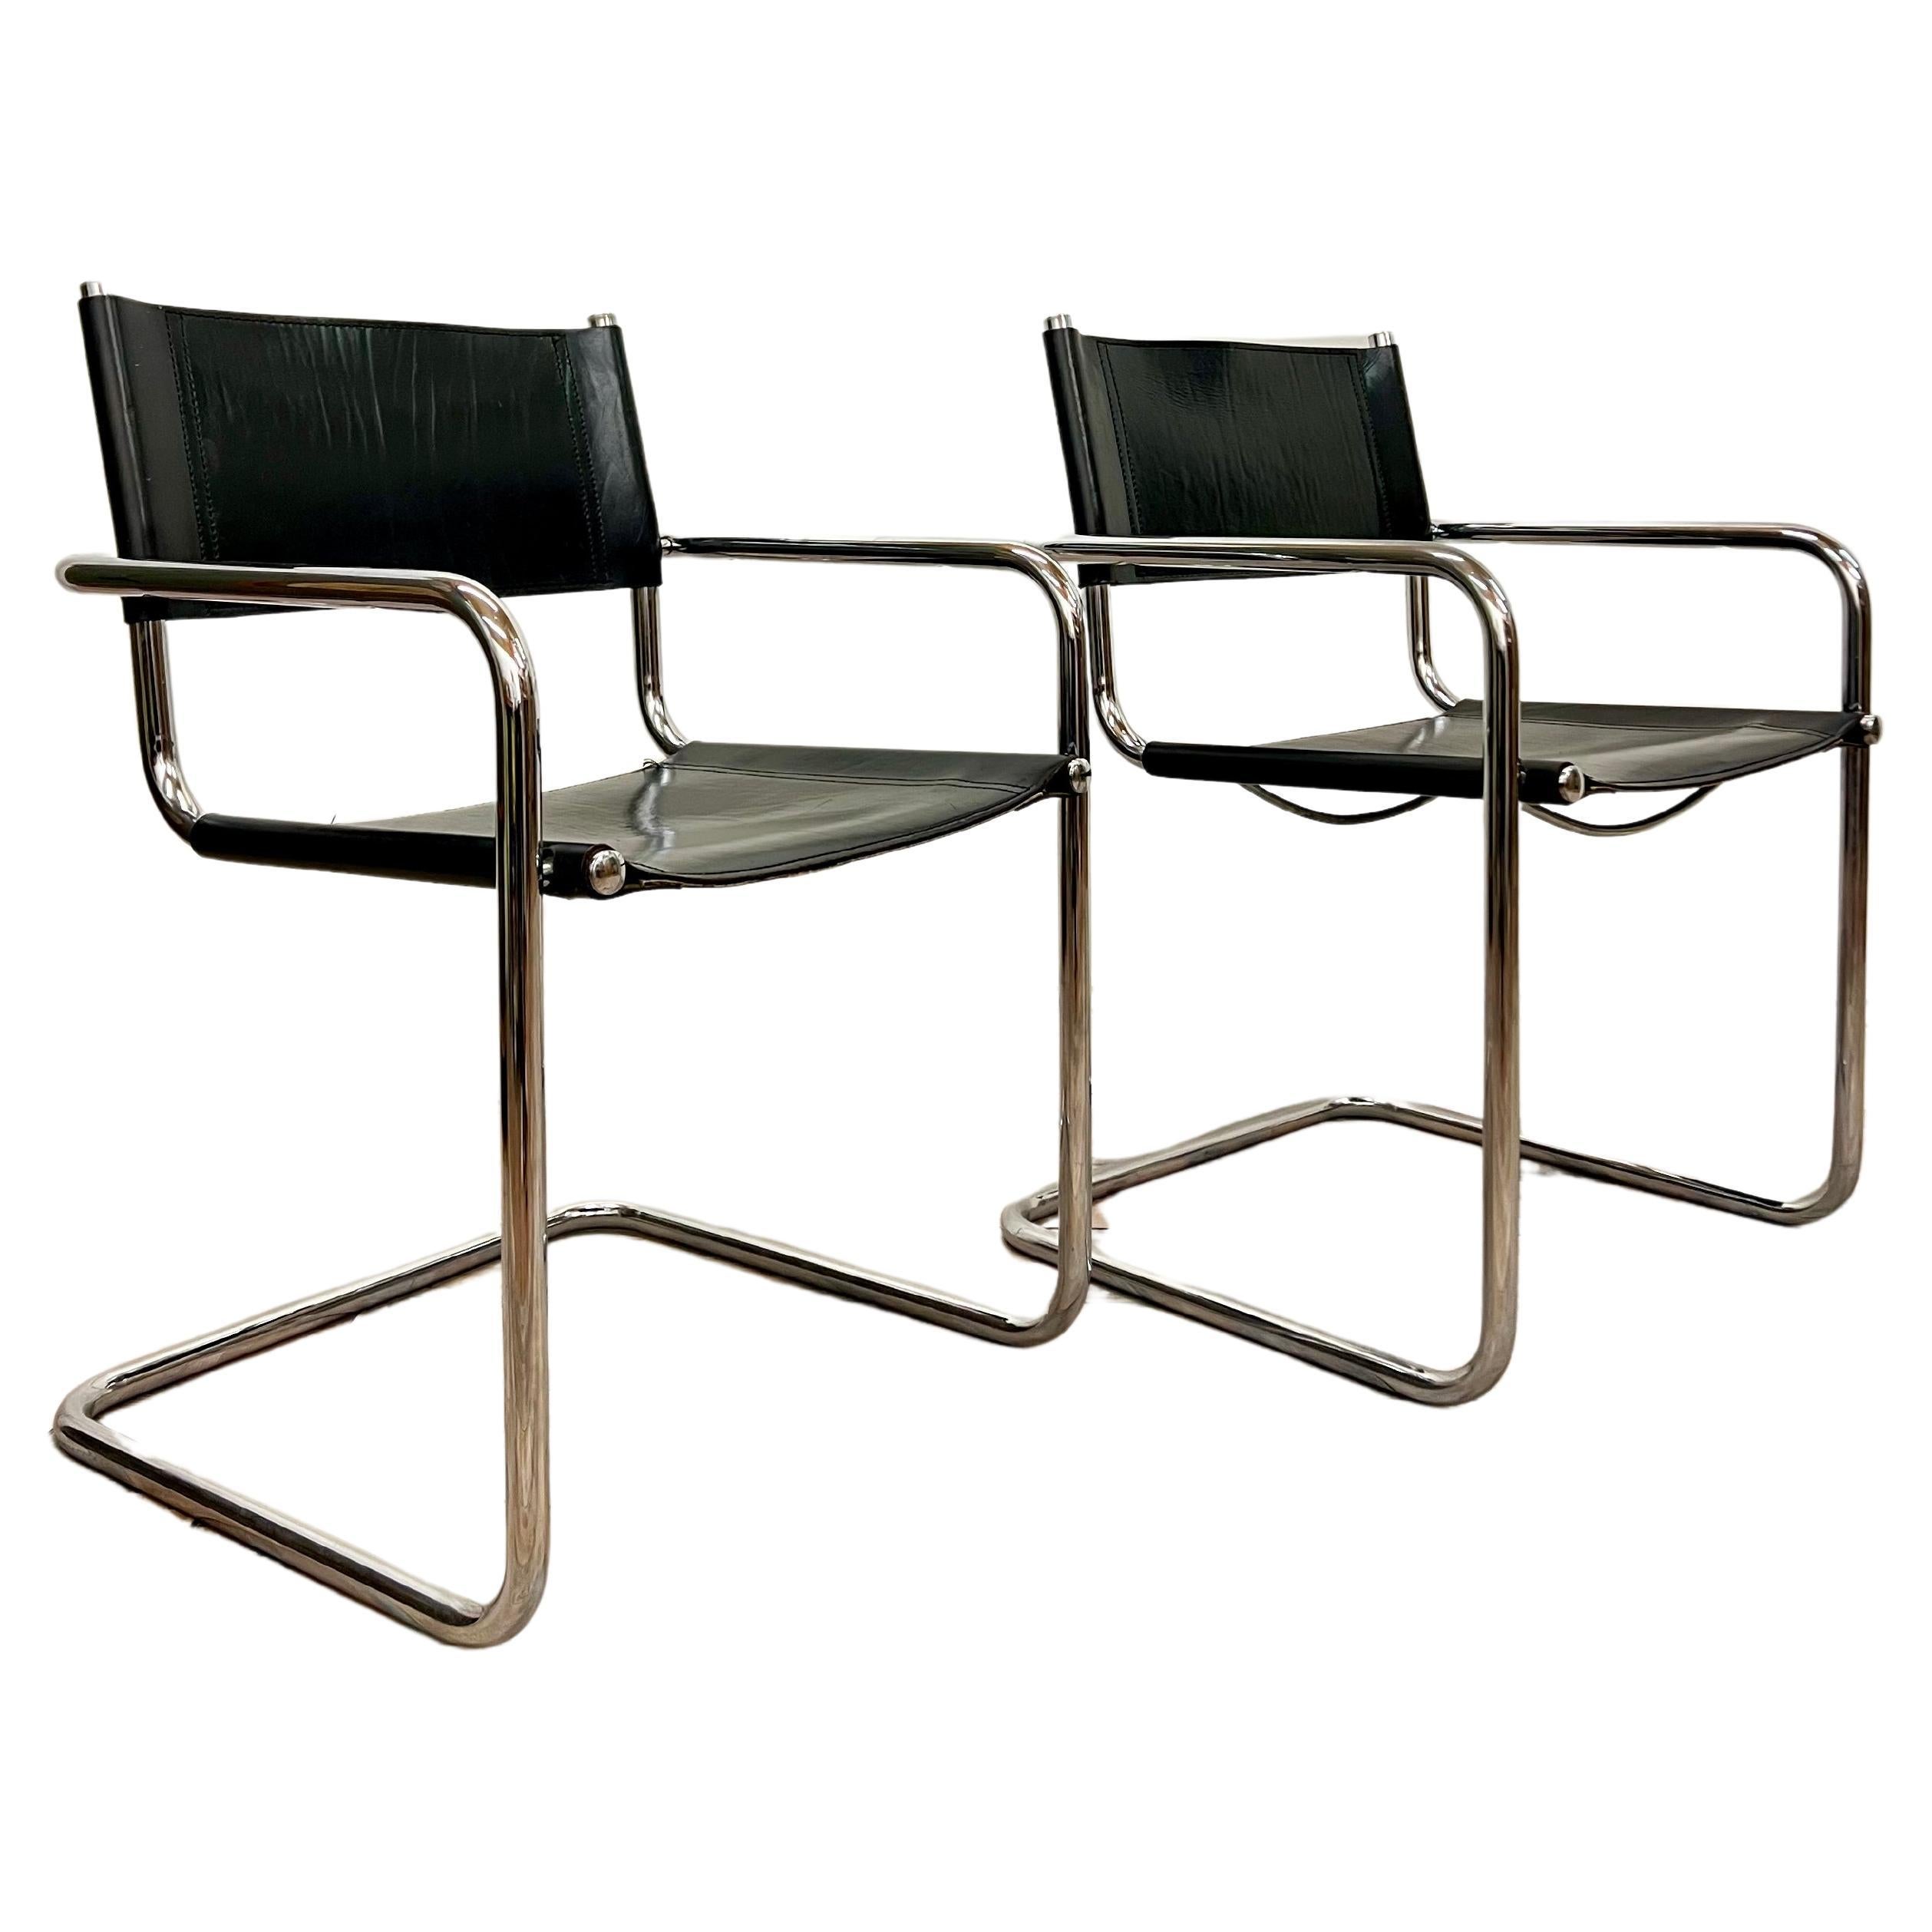 Set of 2 Bauhaus Armchairs by Marcel Breuer B34 for Matteo Grassi, Italy c.1960